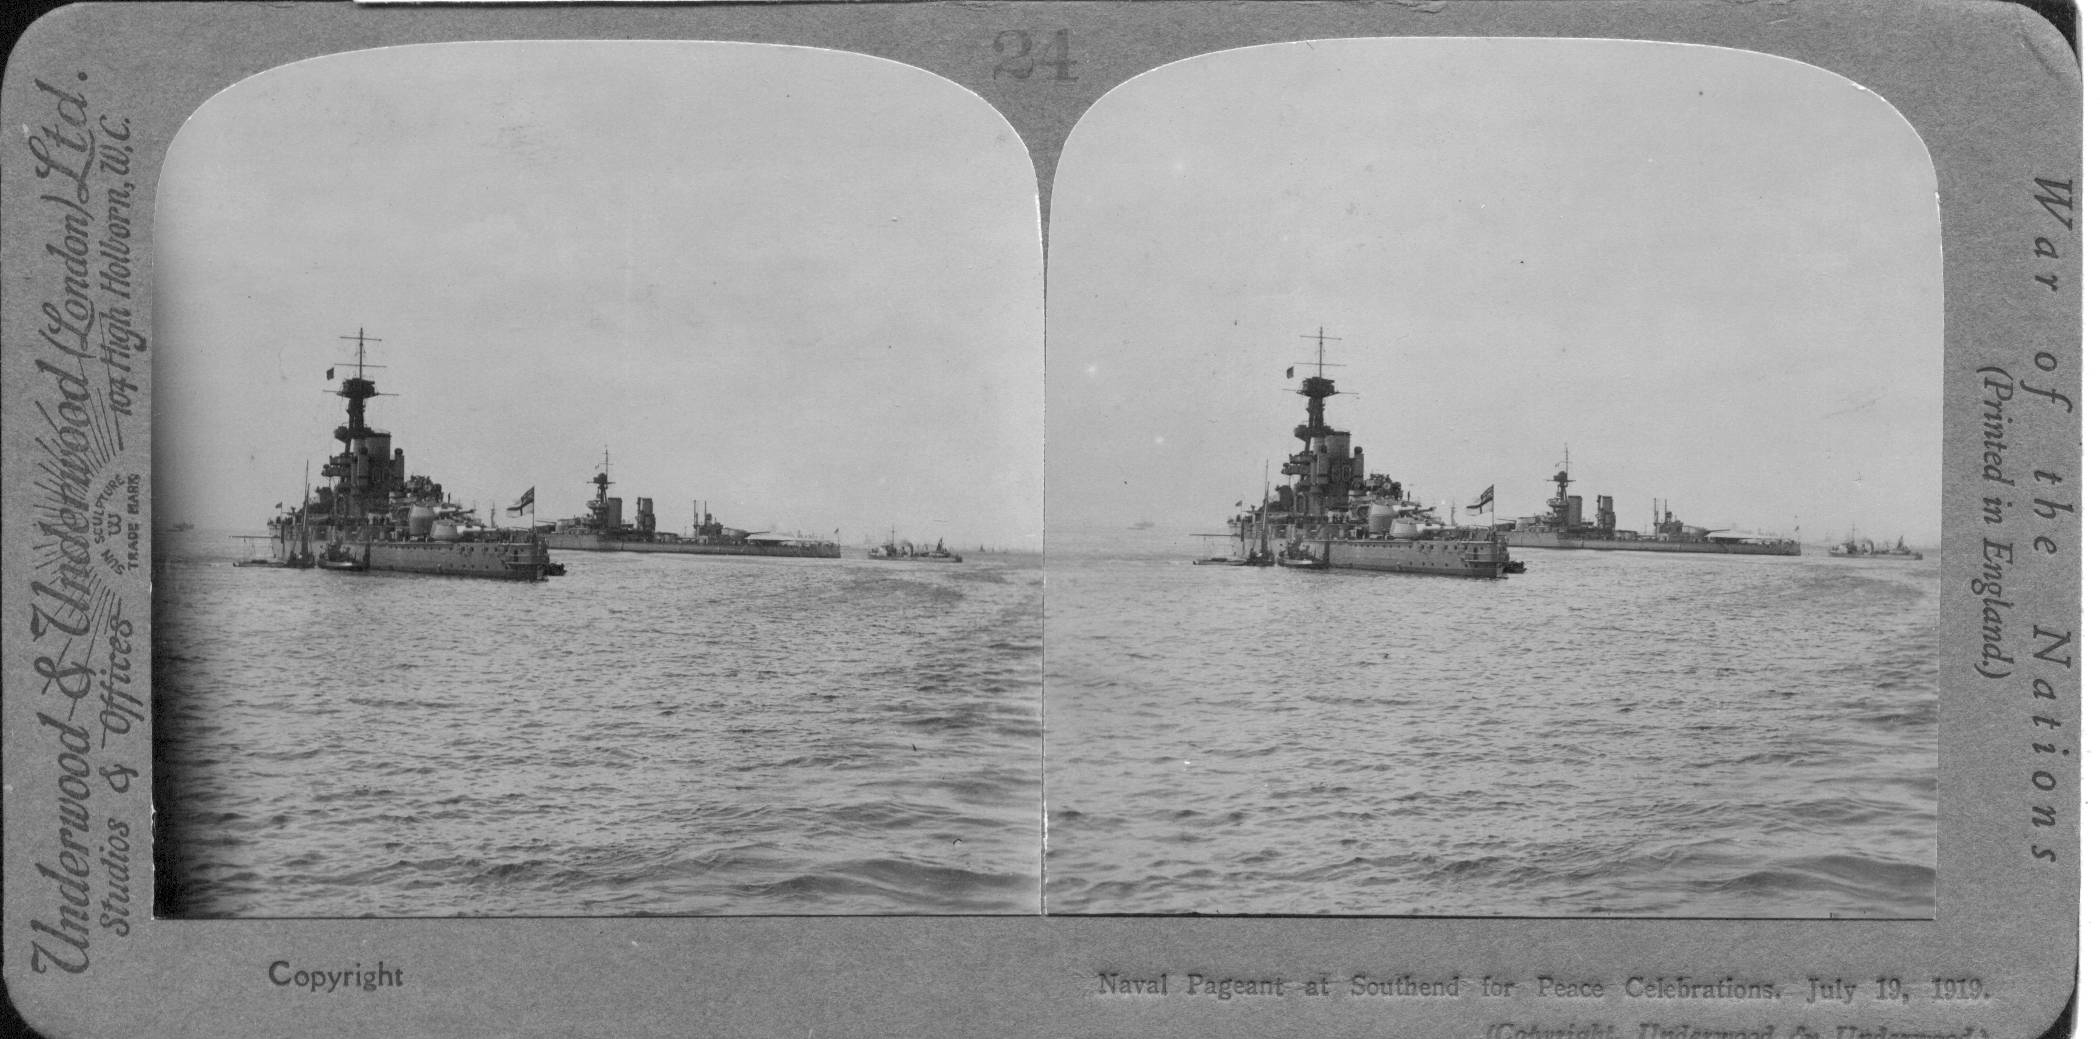 Naval Pageant at Southend for Peace Celebrations. July 19, 1919